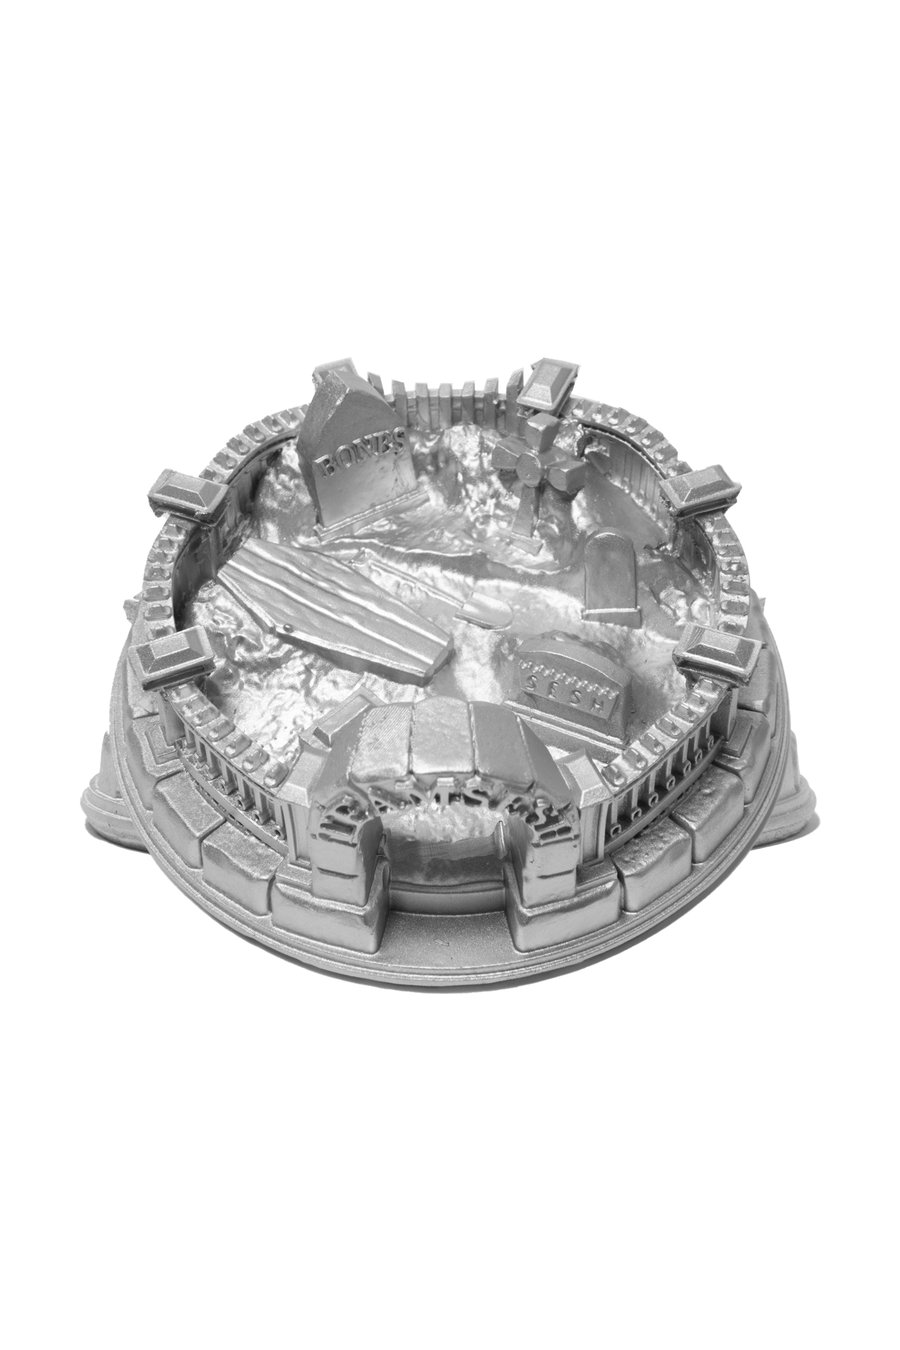 Image of Cemetery Ashtray